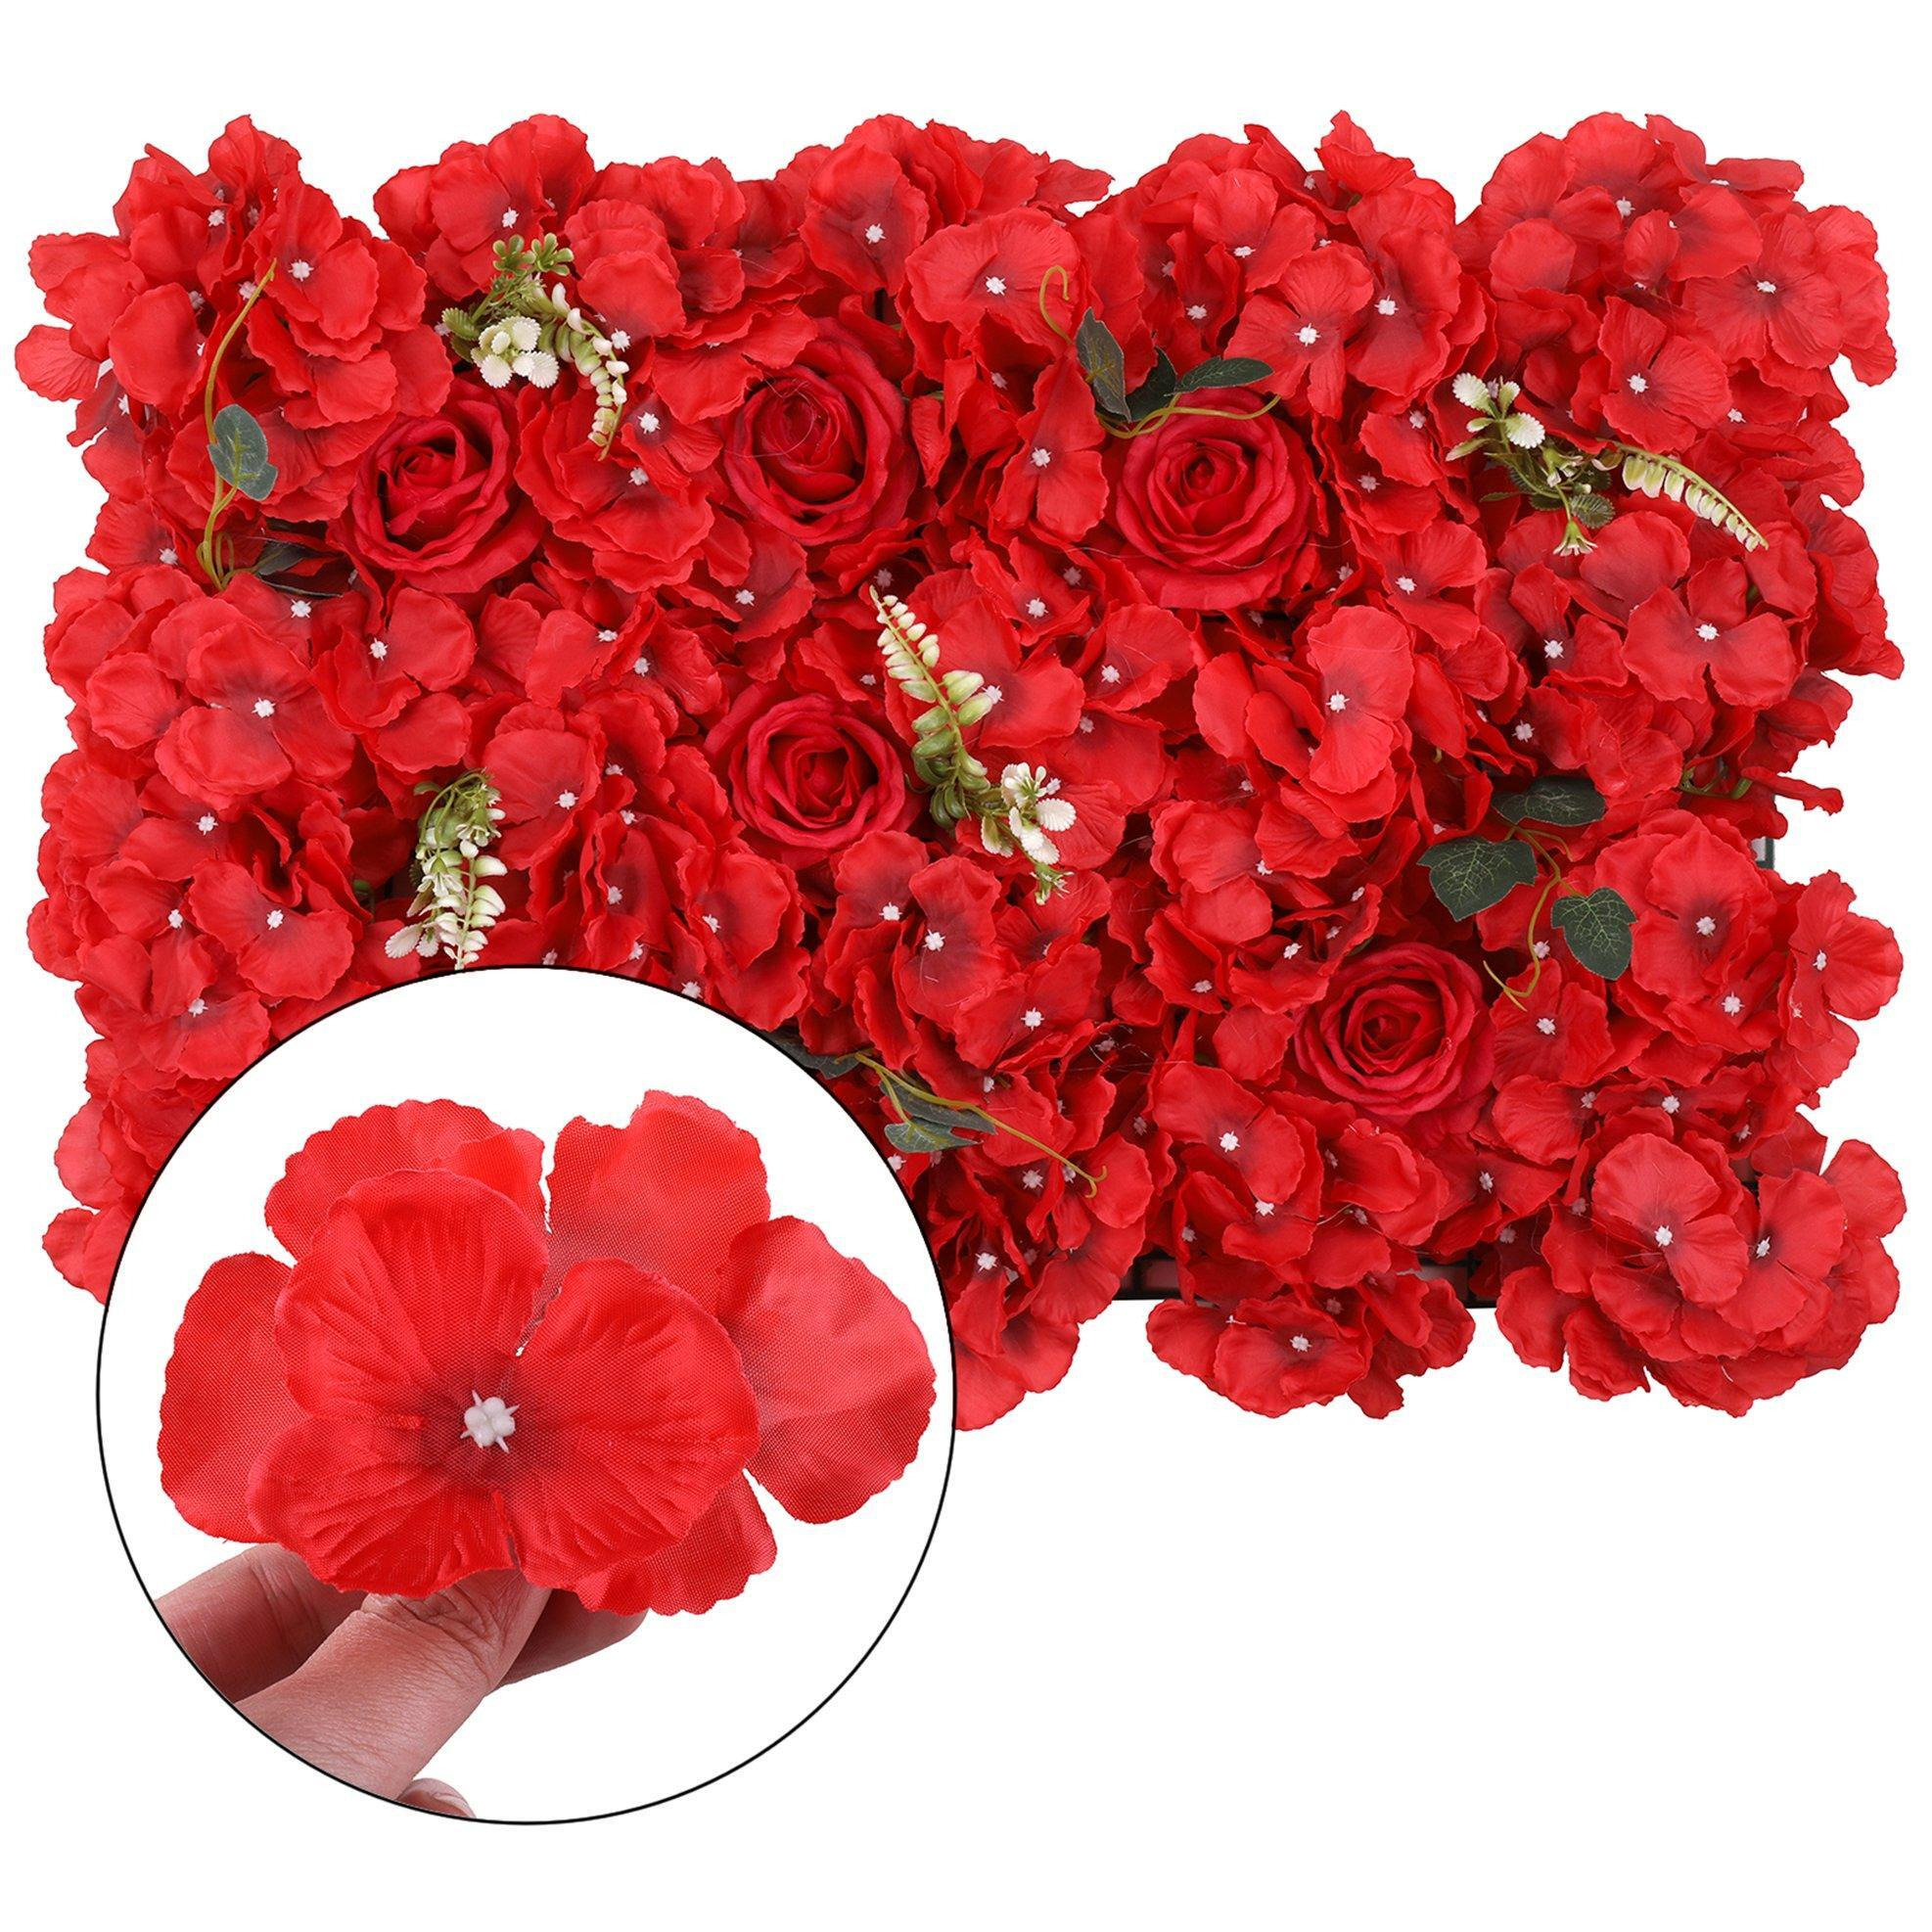 Artificial Flower Wall Panel Decorative Wedding Photography Backdrop - image 1